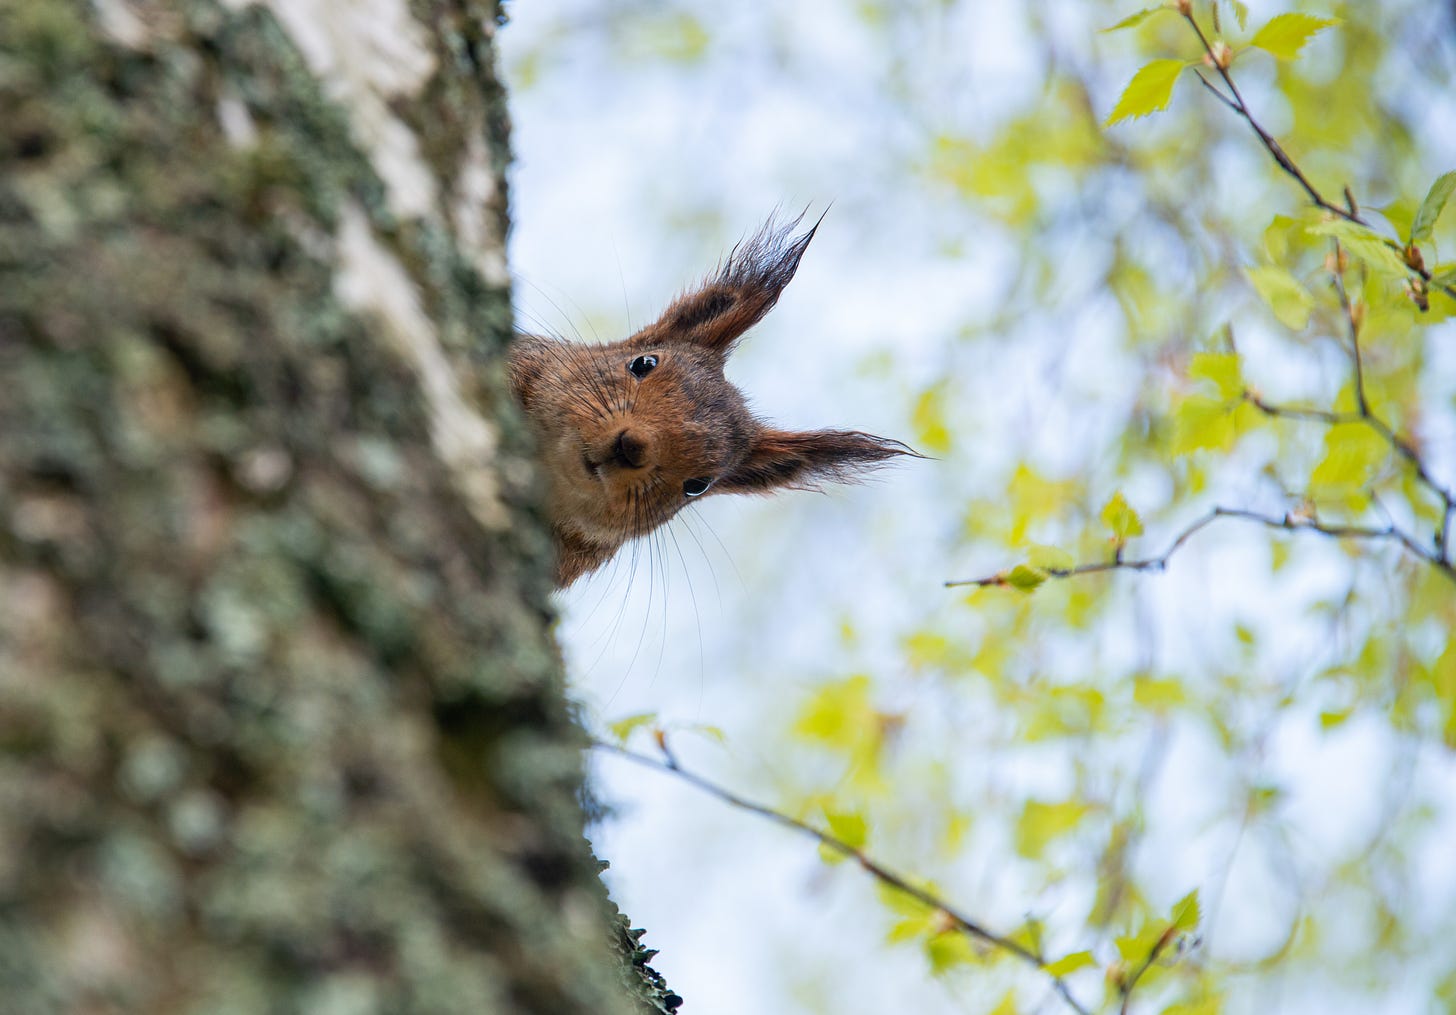 A squirrel looks directly at the camera, its ears perked up and its beady eyes plotting.